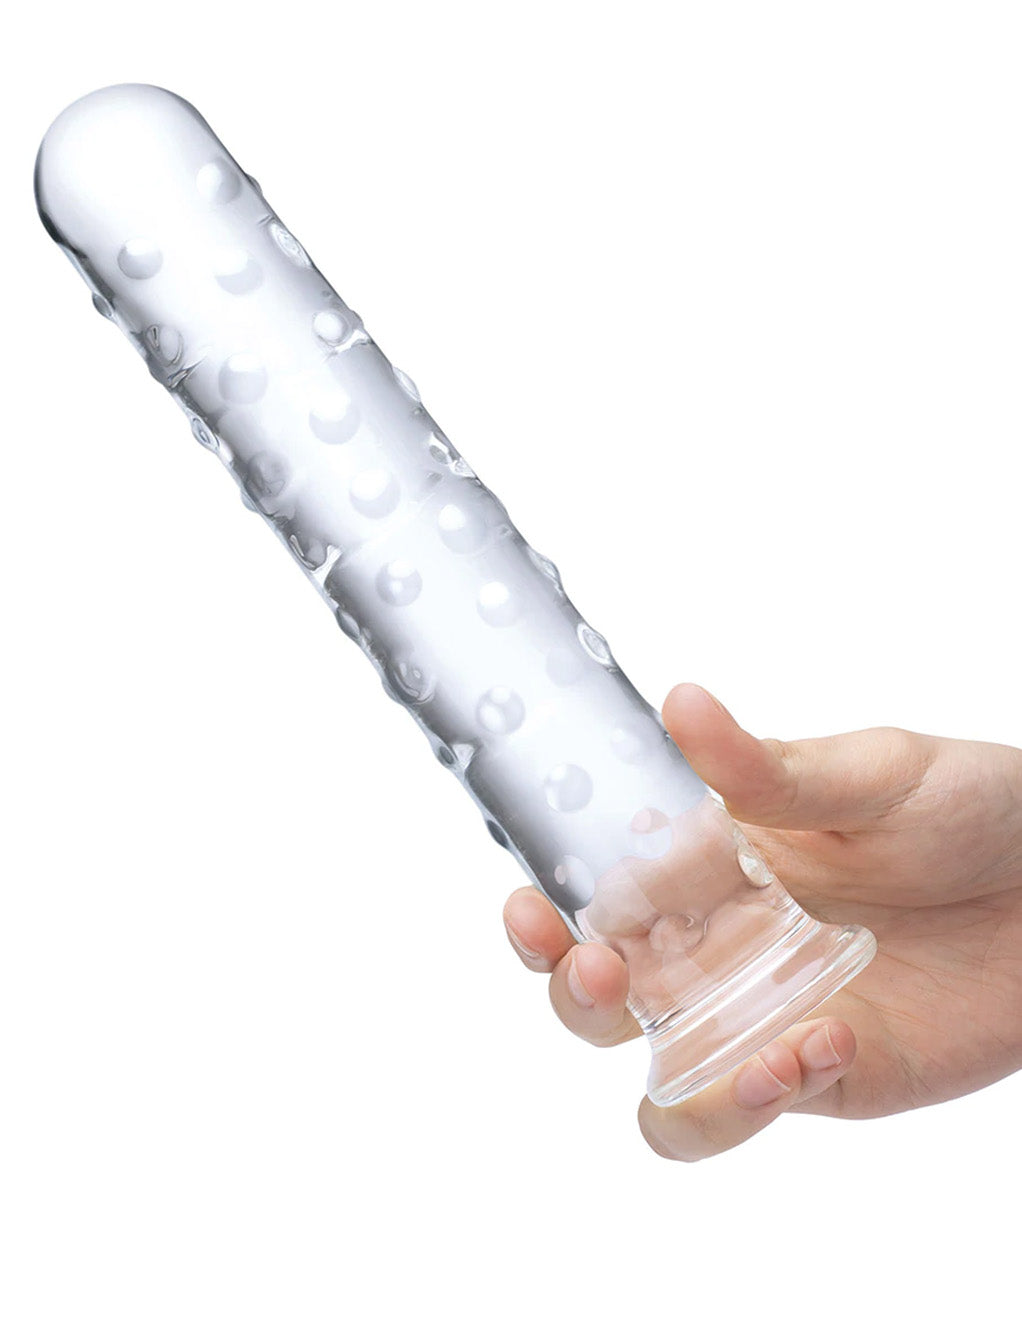 david colley recommends 12 inch glass dildo pic